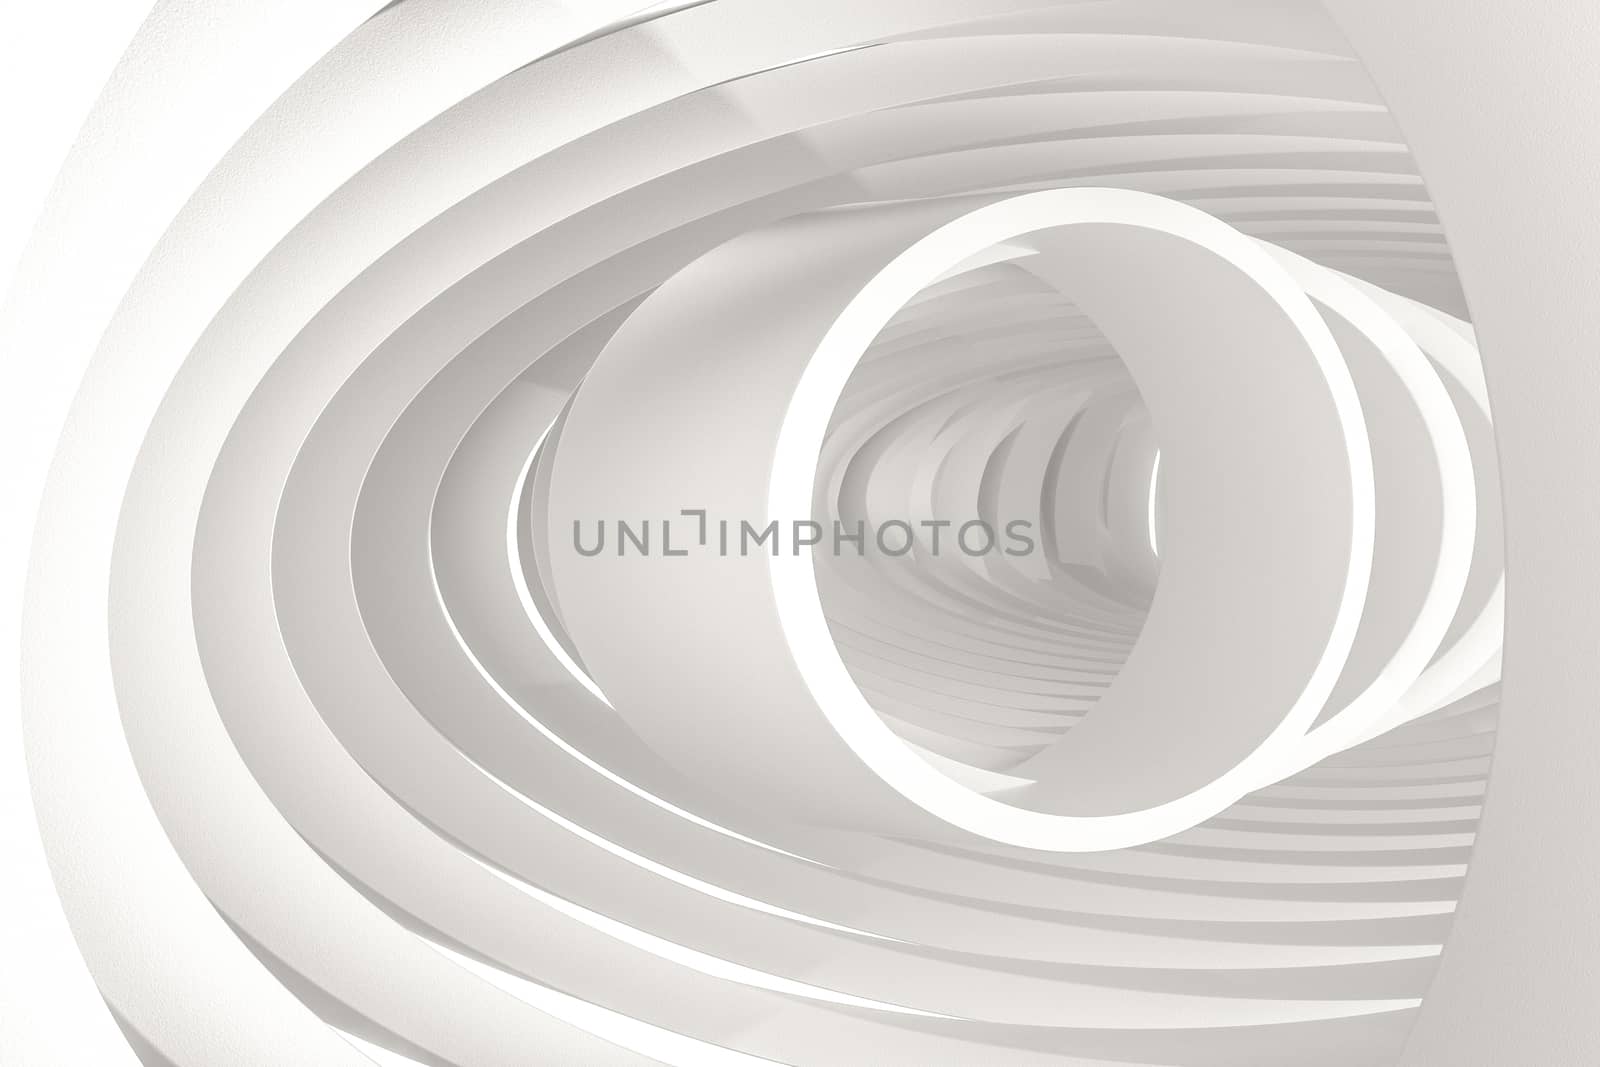 3d rendering, white interior building structure by vinkfan